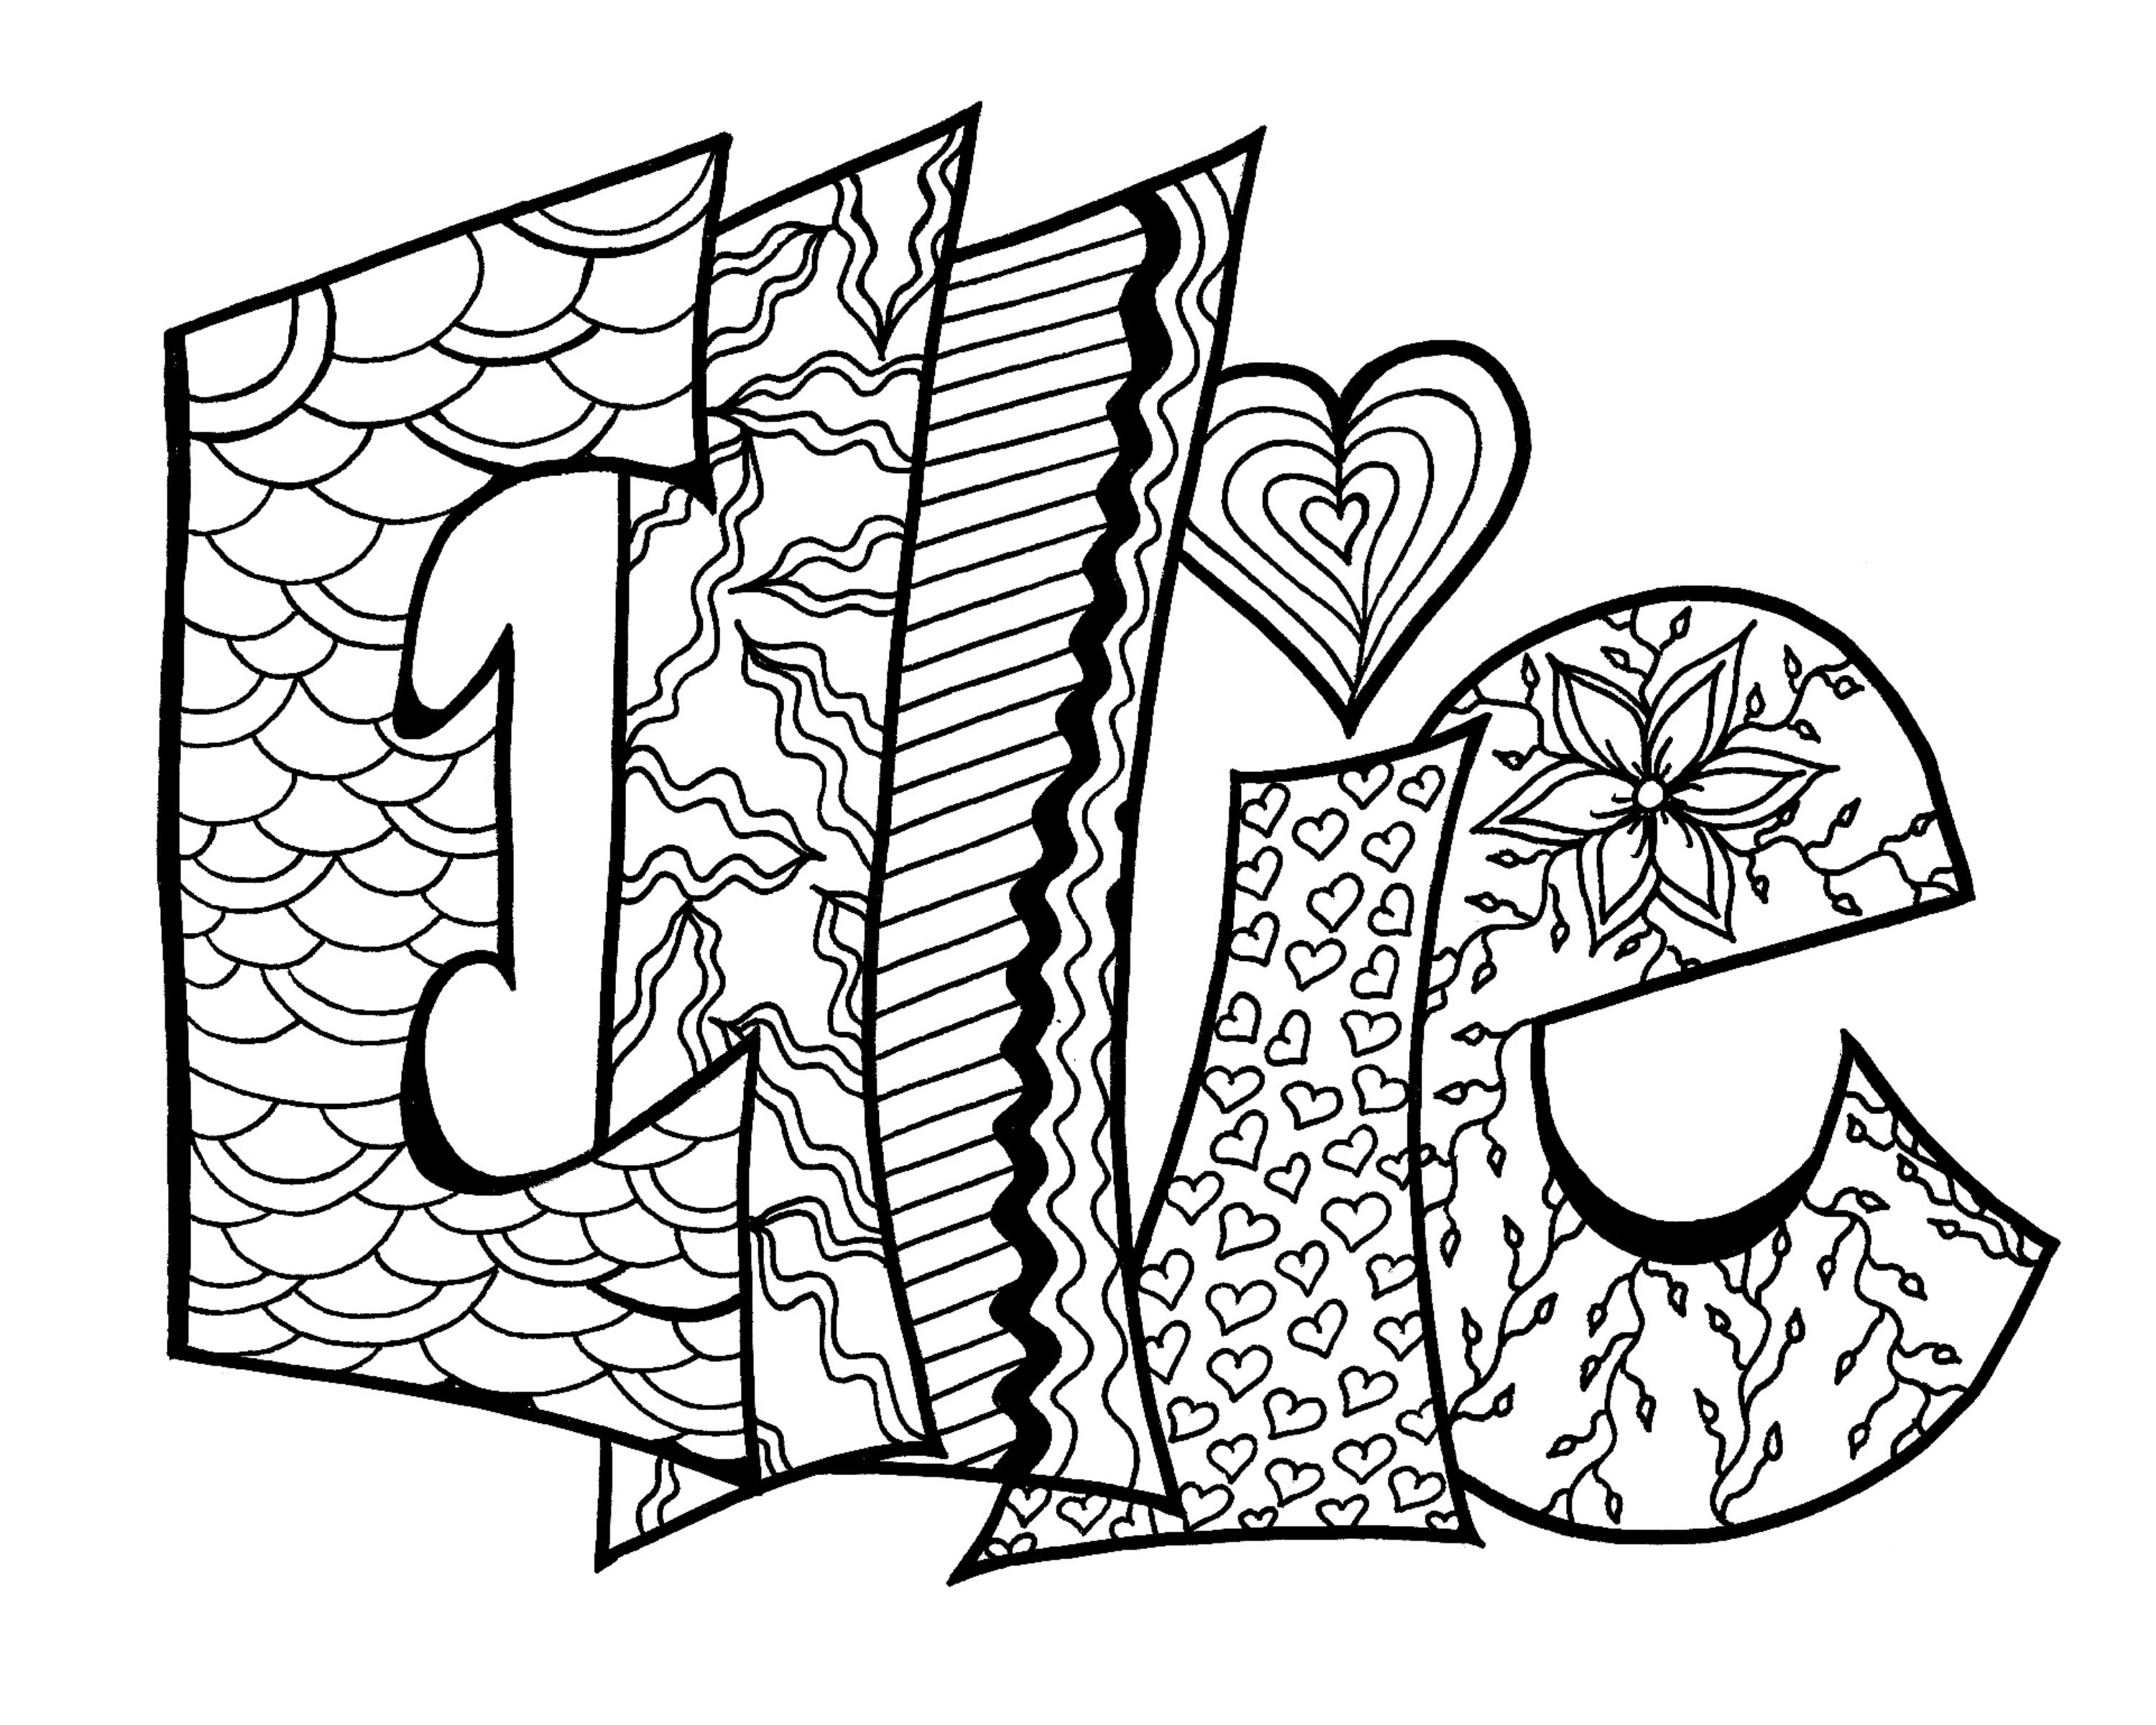 Free Custom Coloring Pages Coloring Pages Fish Coloring Pdf At Get Drawings Free For Personal